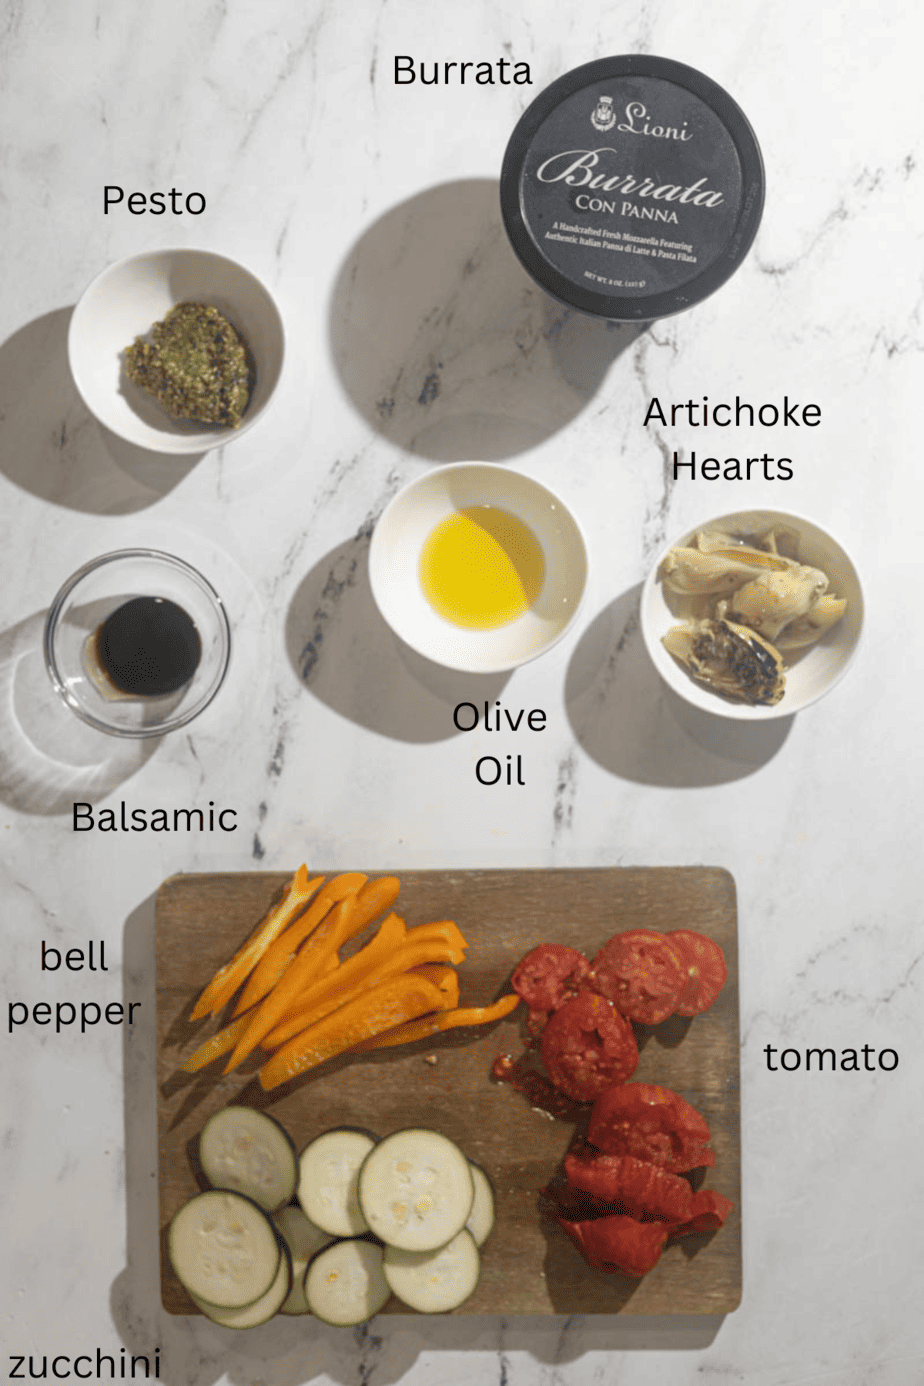 All ingredients for the sandwich in different bowls with text labels